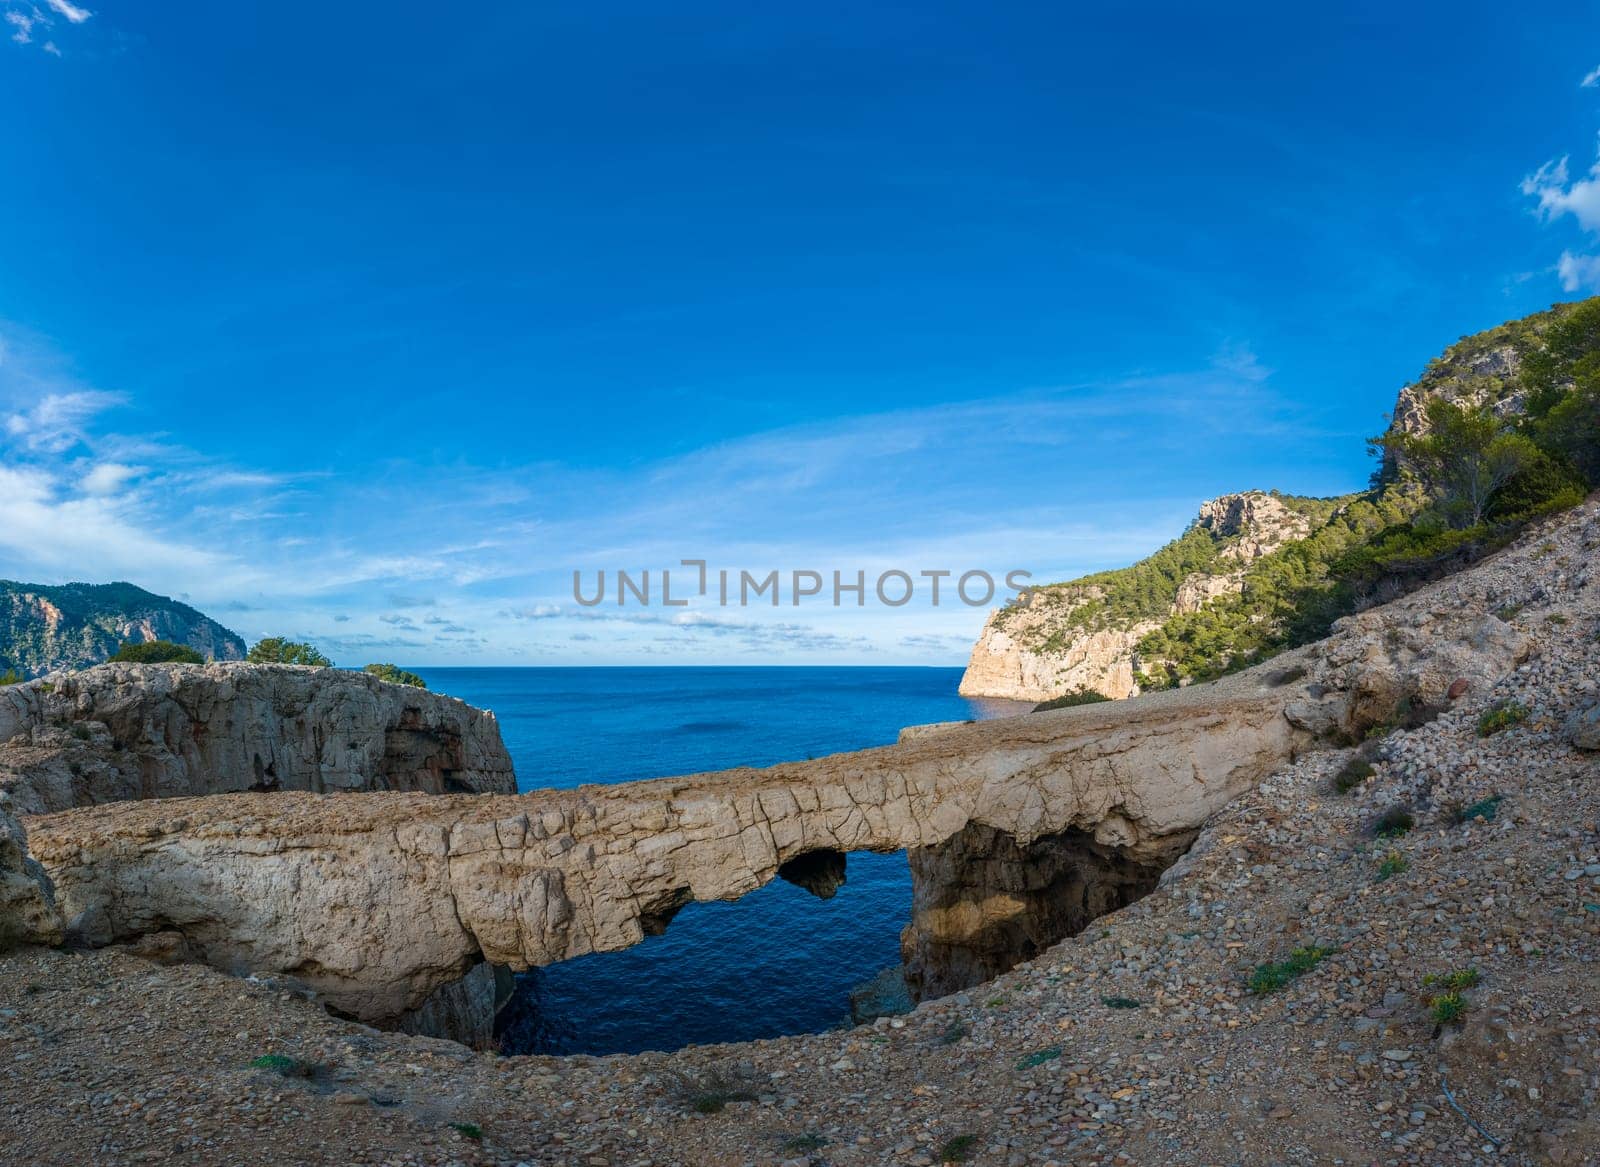 Impressive rock arch on Ibiza's coast, contrasting with blue sky and turquoise sea.